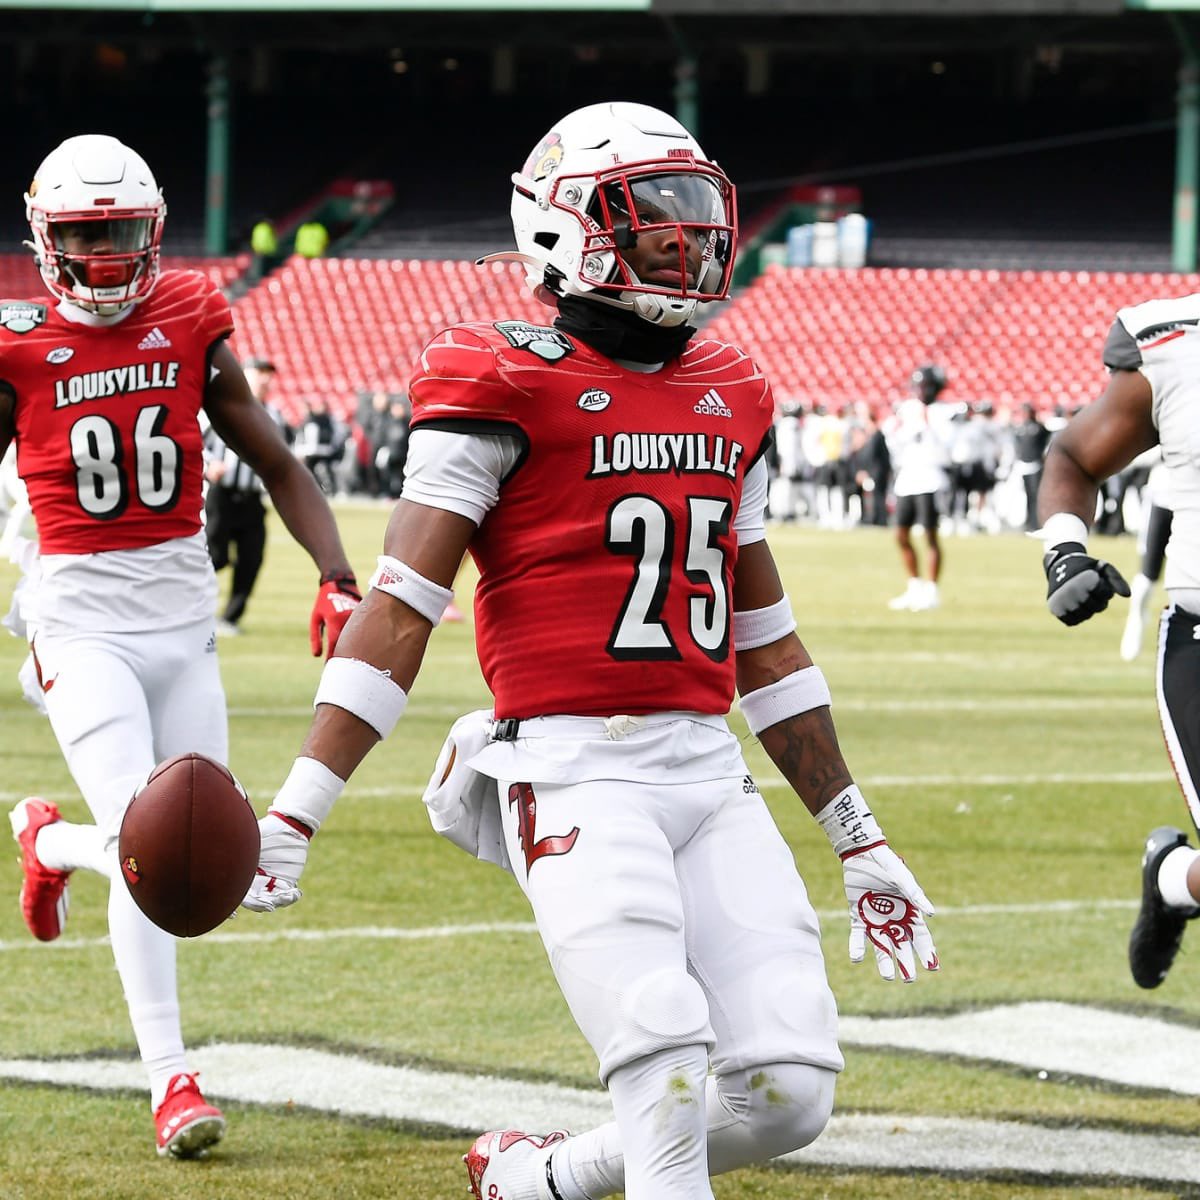 Thankful to have received an offer from @LouisvilleFB!! #gocards @pete_nochta13 @BrianBrohm @CPAFootball @HLNichols11